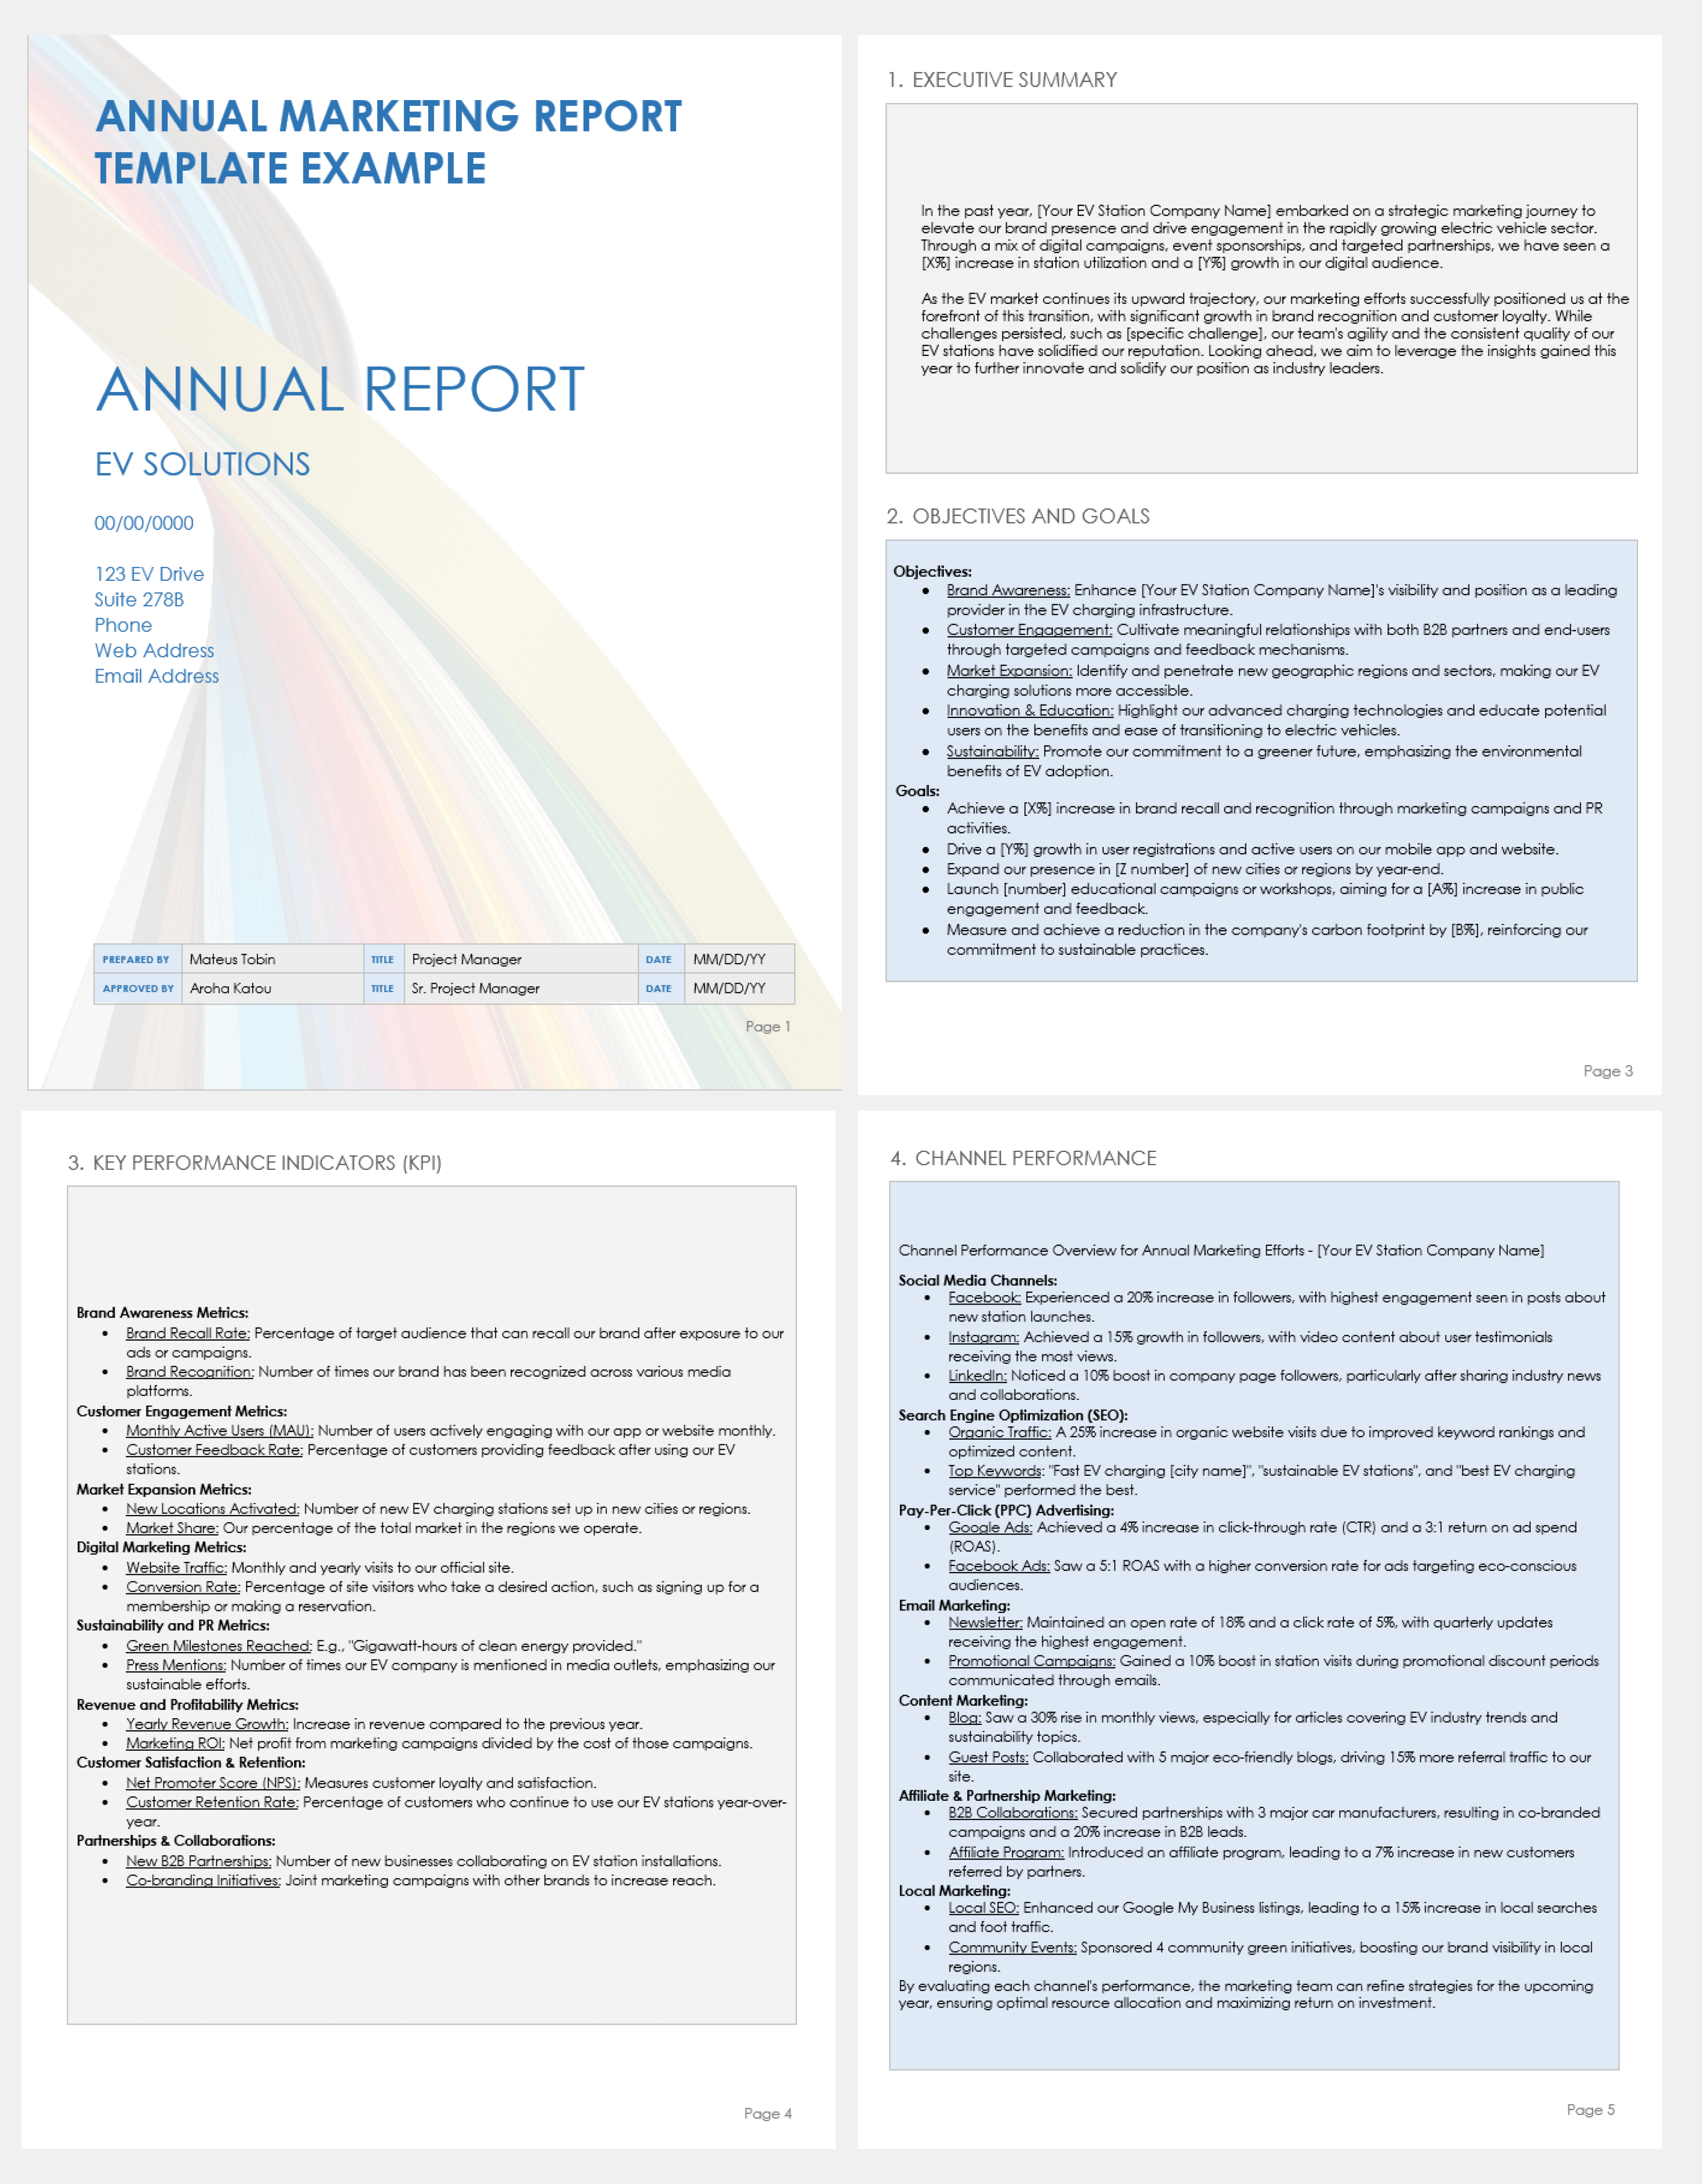 Annual Marketing Report Example Template